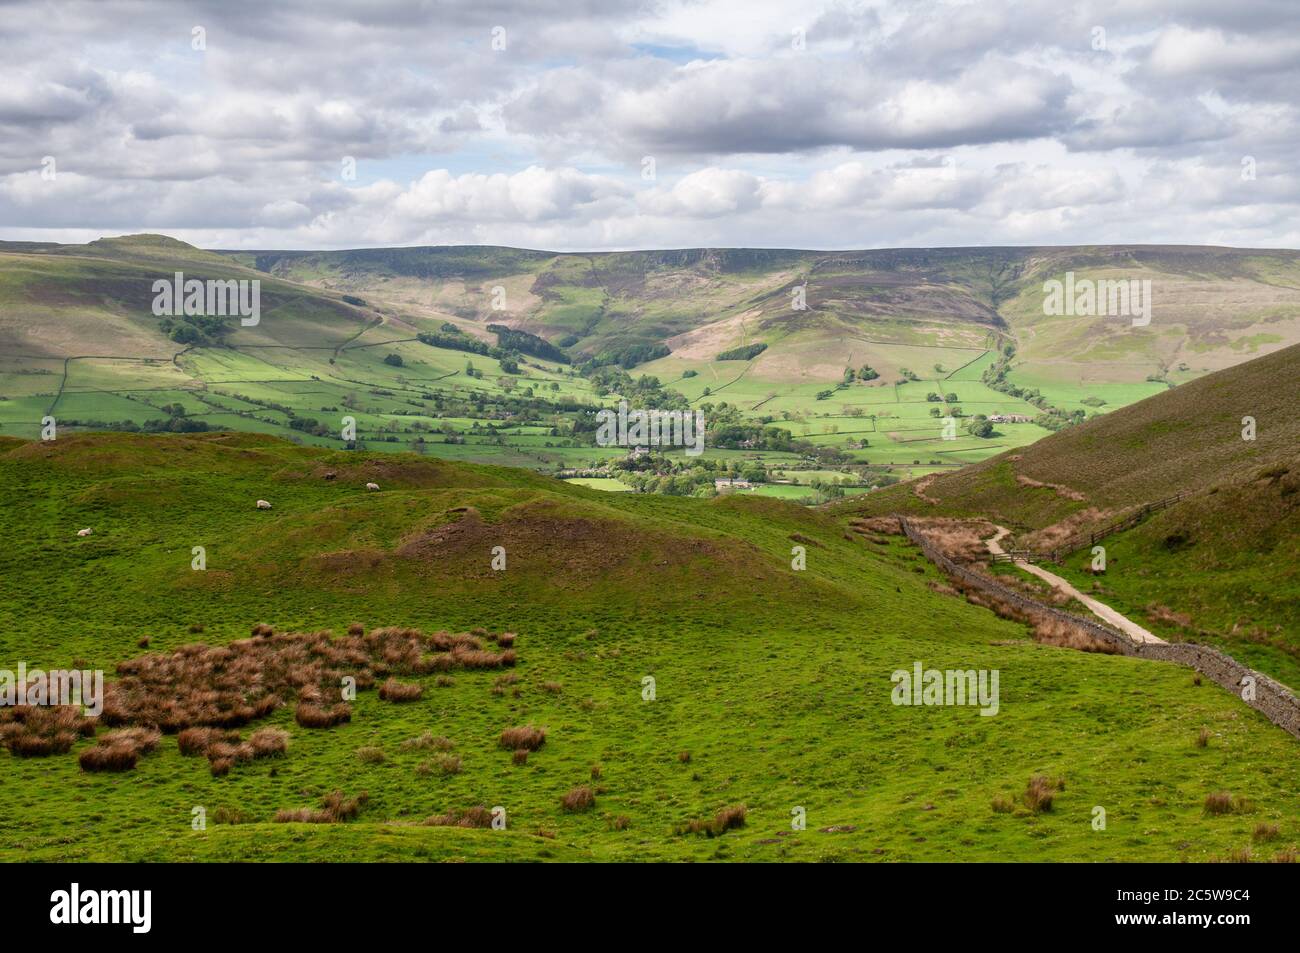 The moors of Kinder Scout rise above the Vale of Edale in Derbyshire's Peak District. Stock Photo